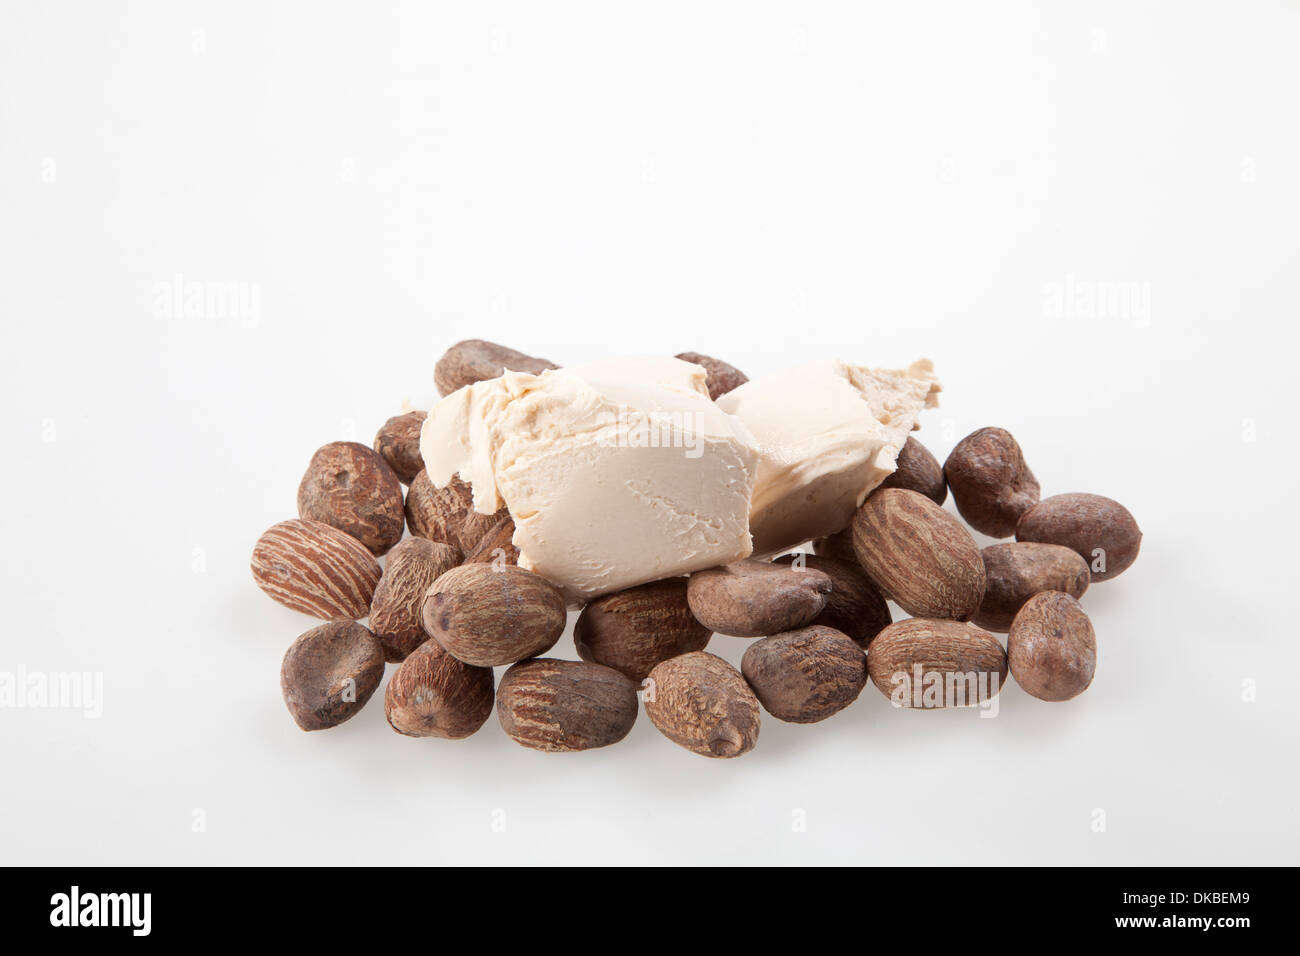 Shea Nuts with shea nut butter cream. Stock Photo